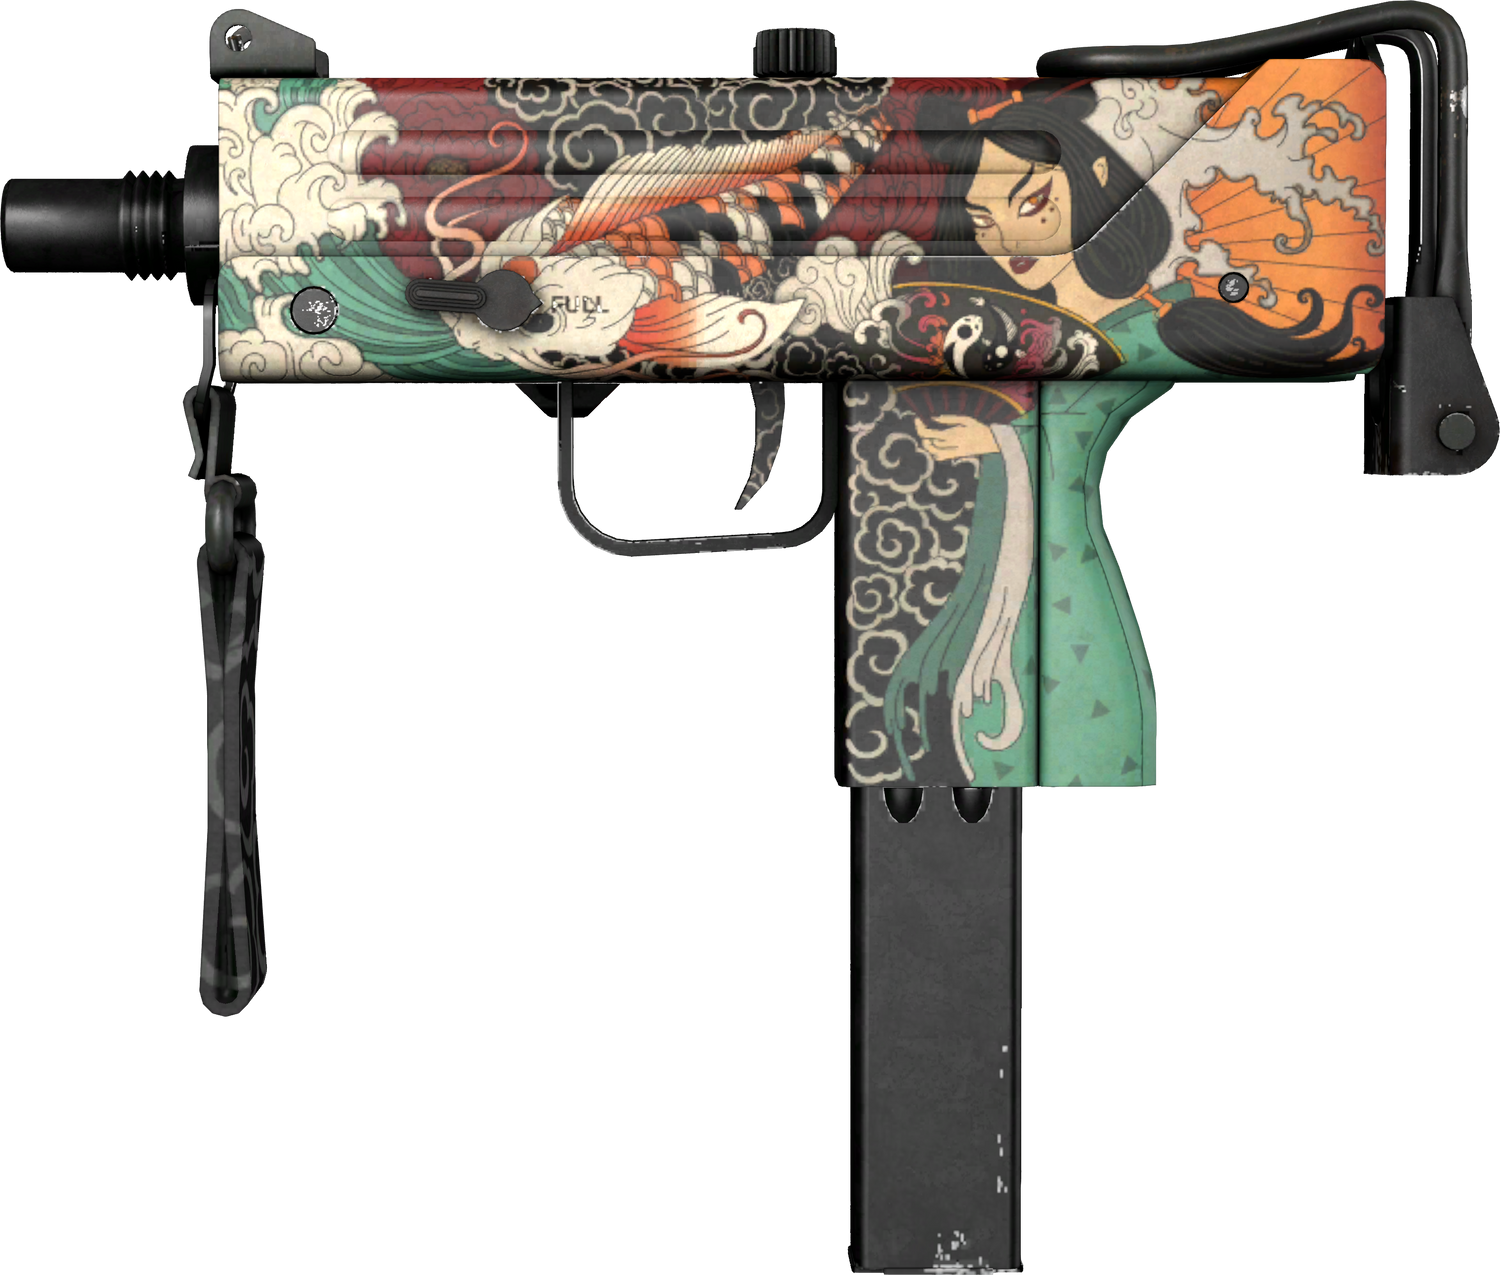 Toy Chestplate cs go skin for apple download free